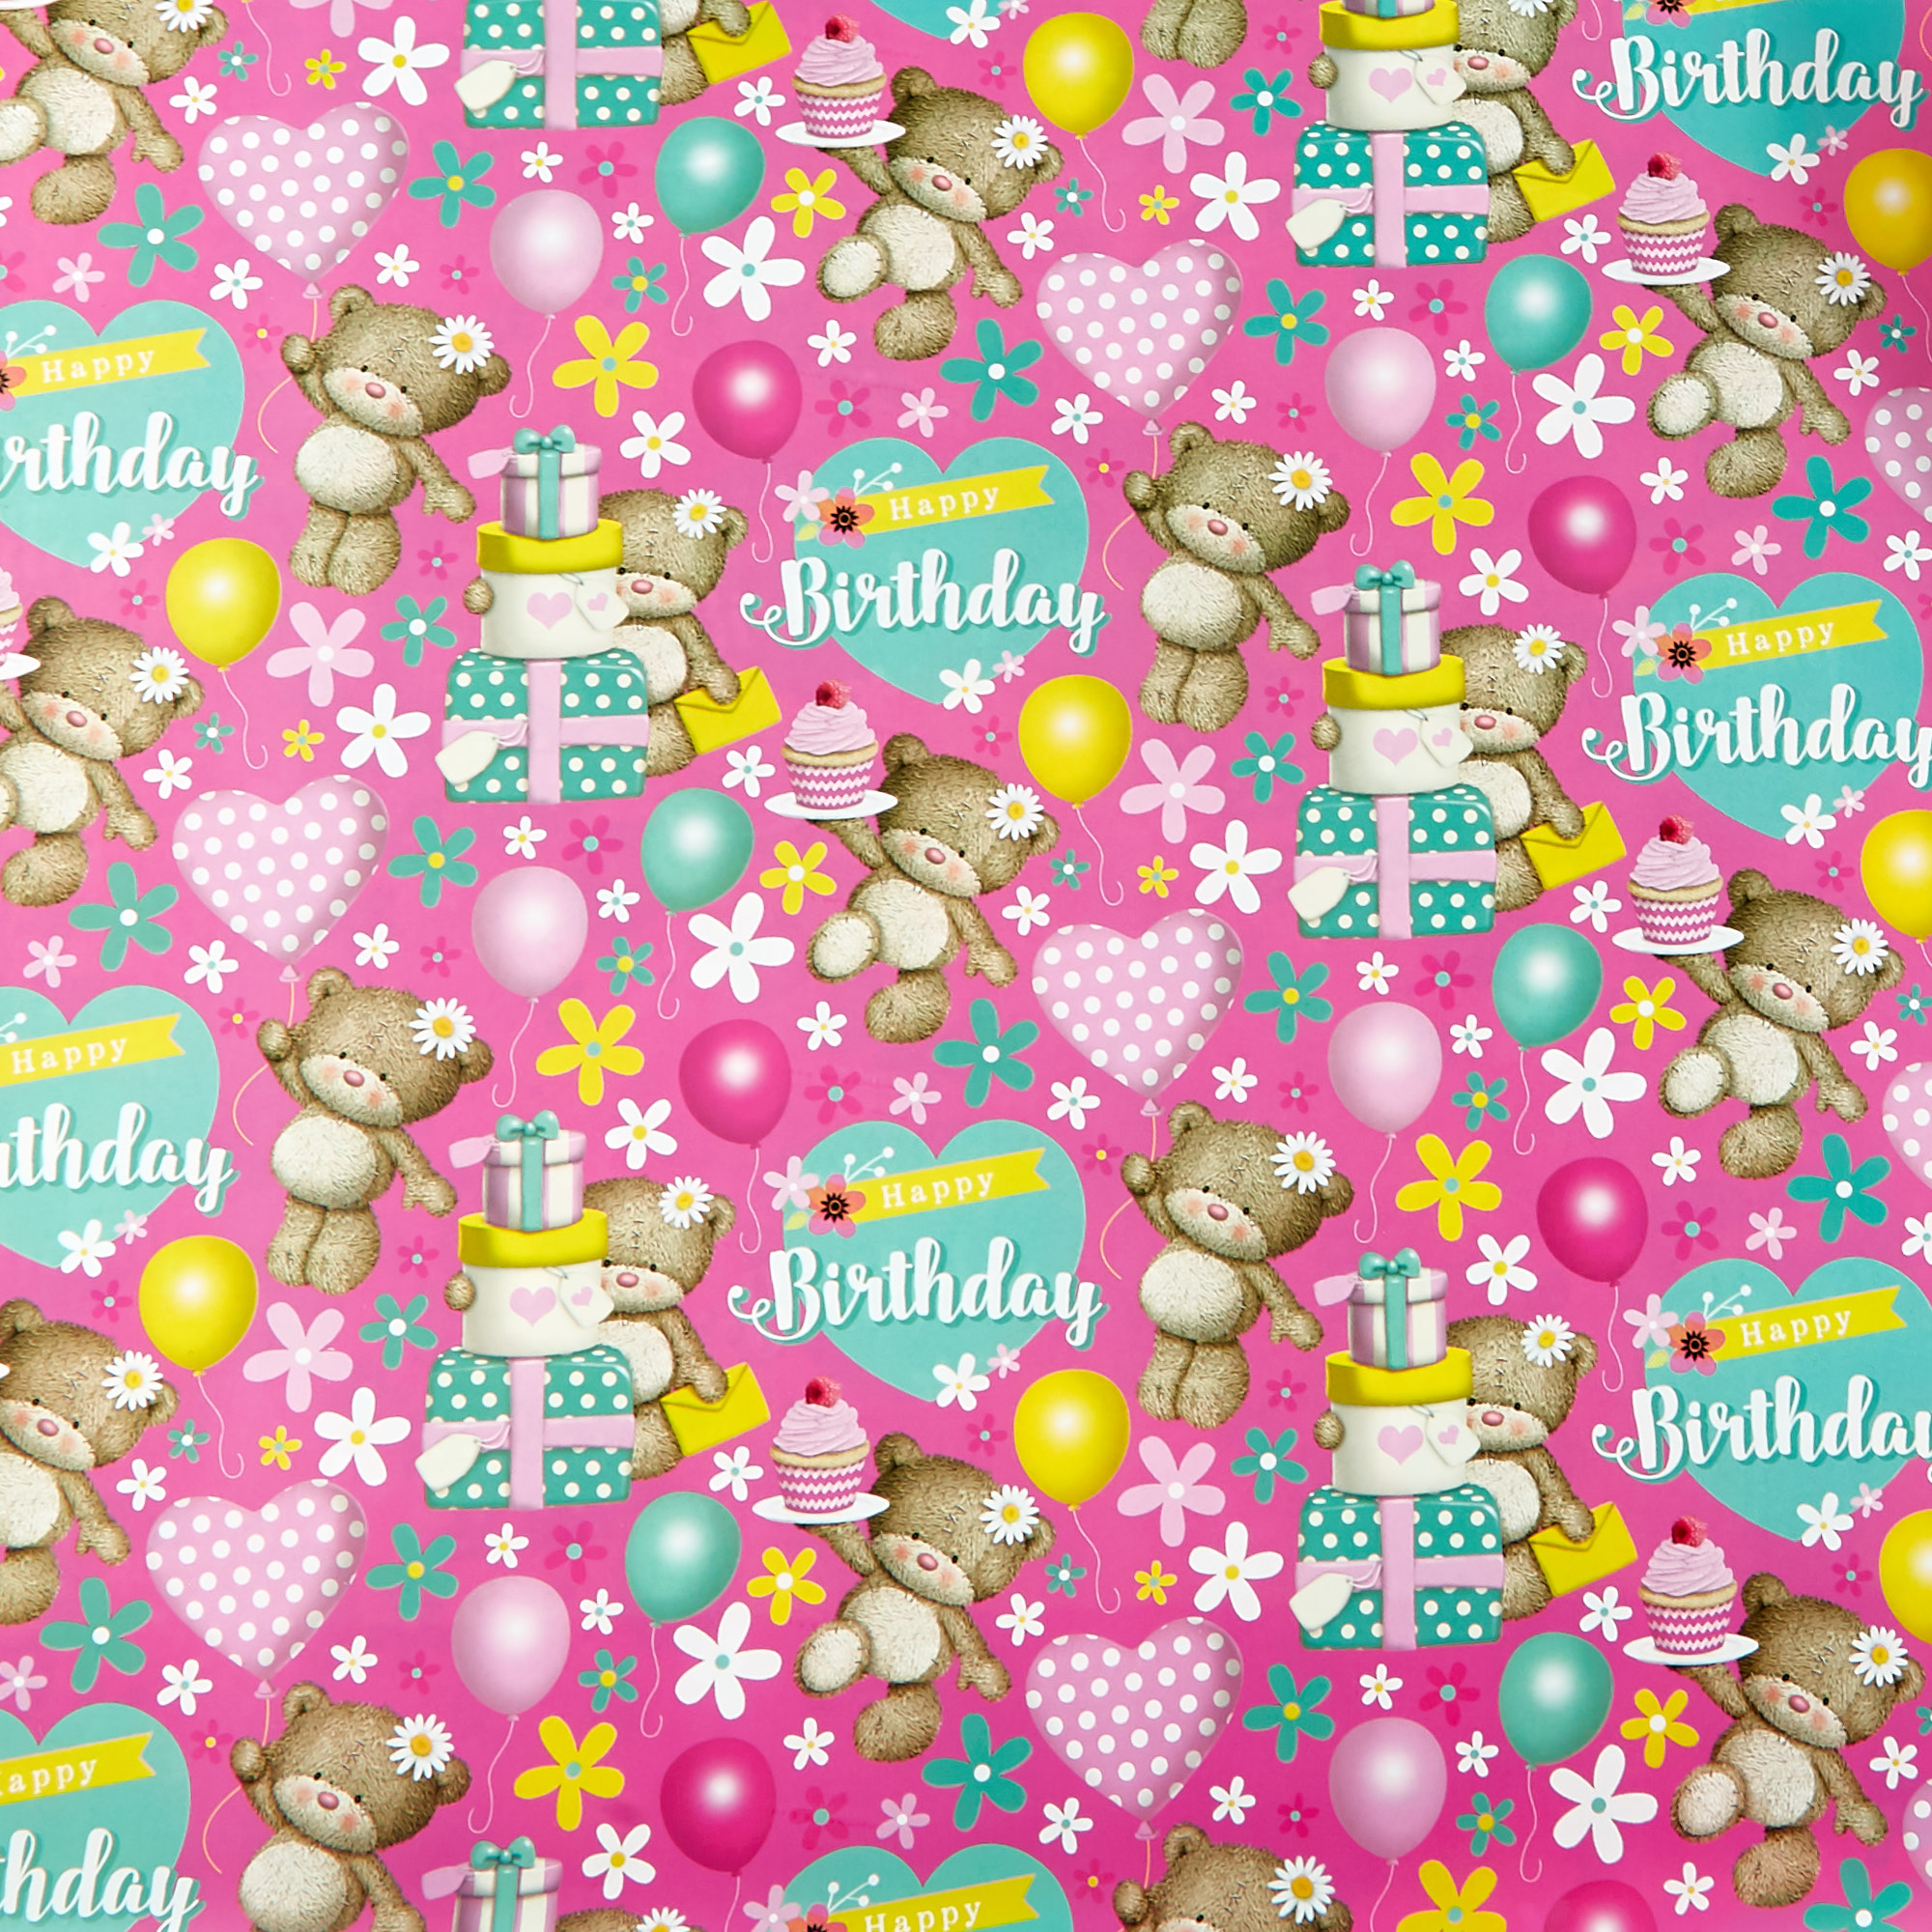 Hugs Pink Birthday Wrapping Paper - 24 Sheets